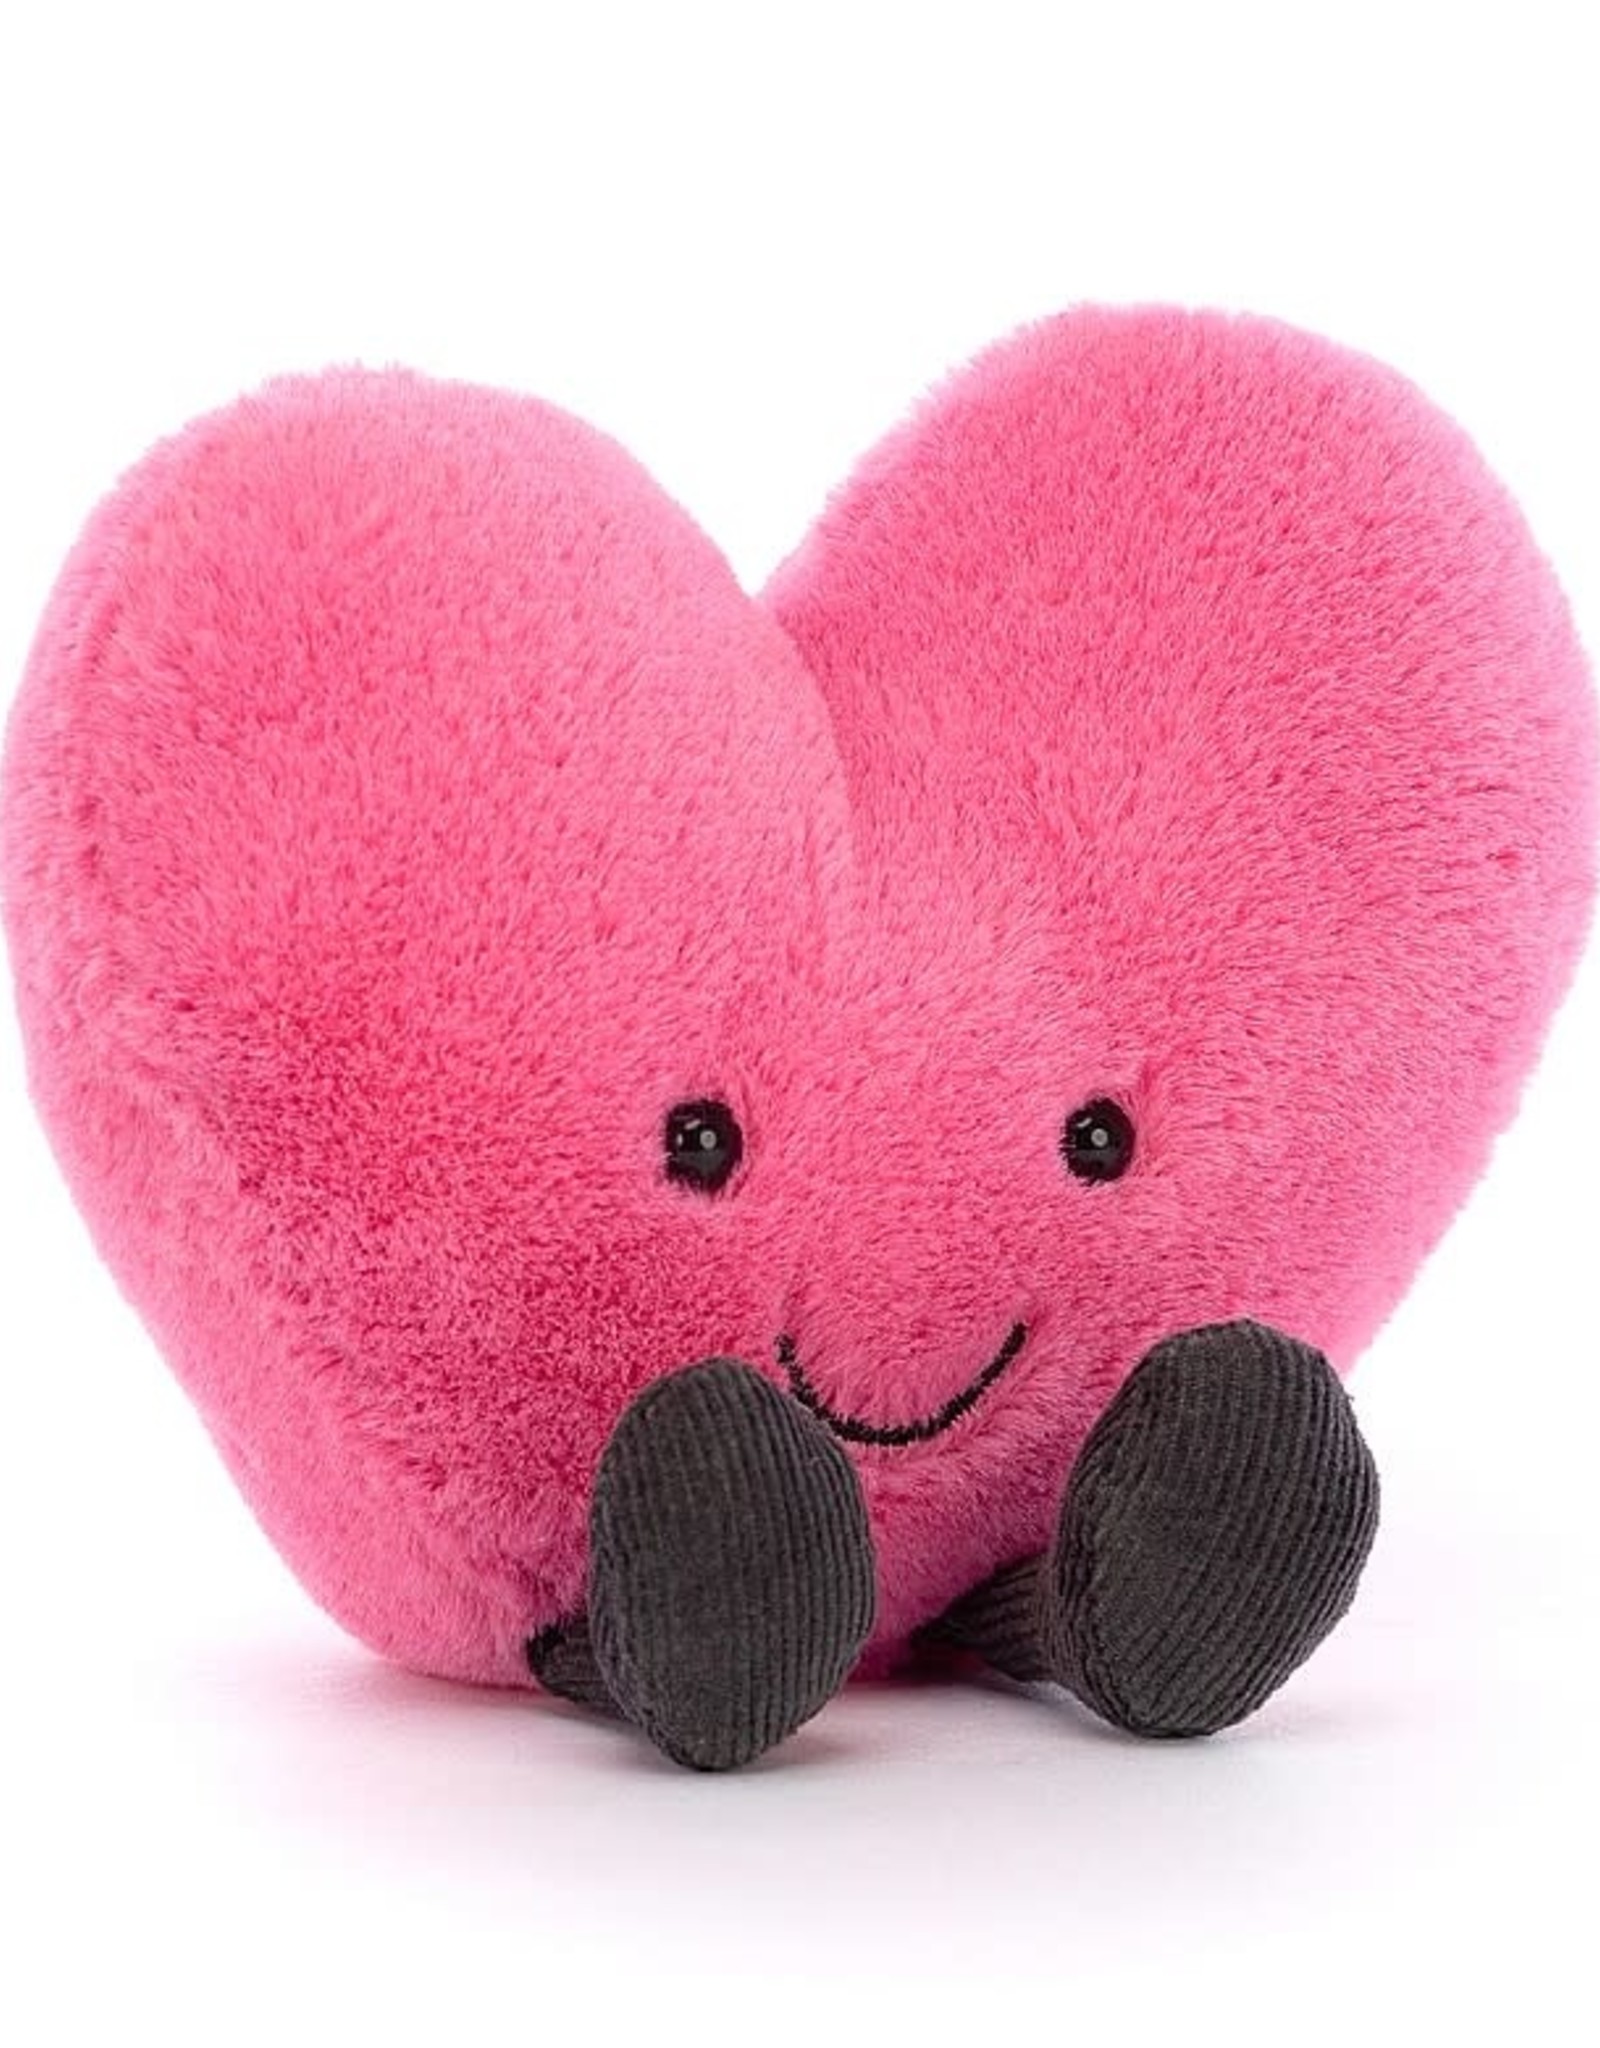 Jellycat Amuseable Hot Pink Heart Small